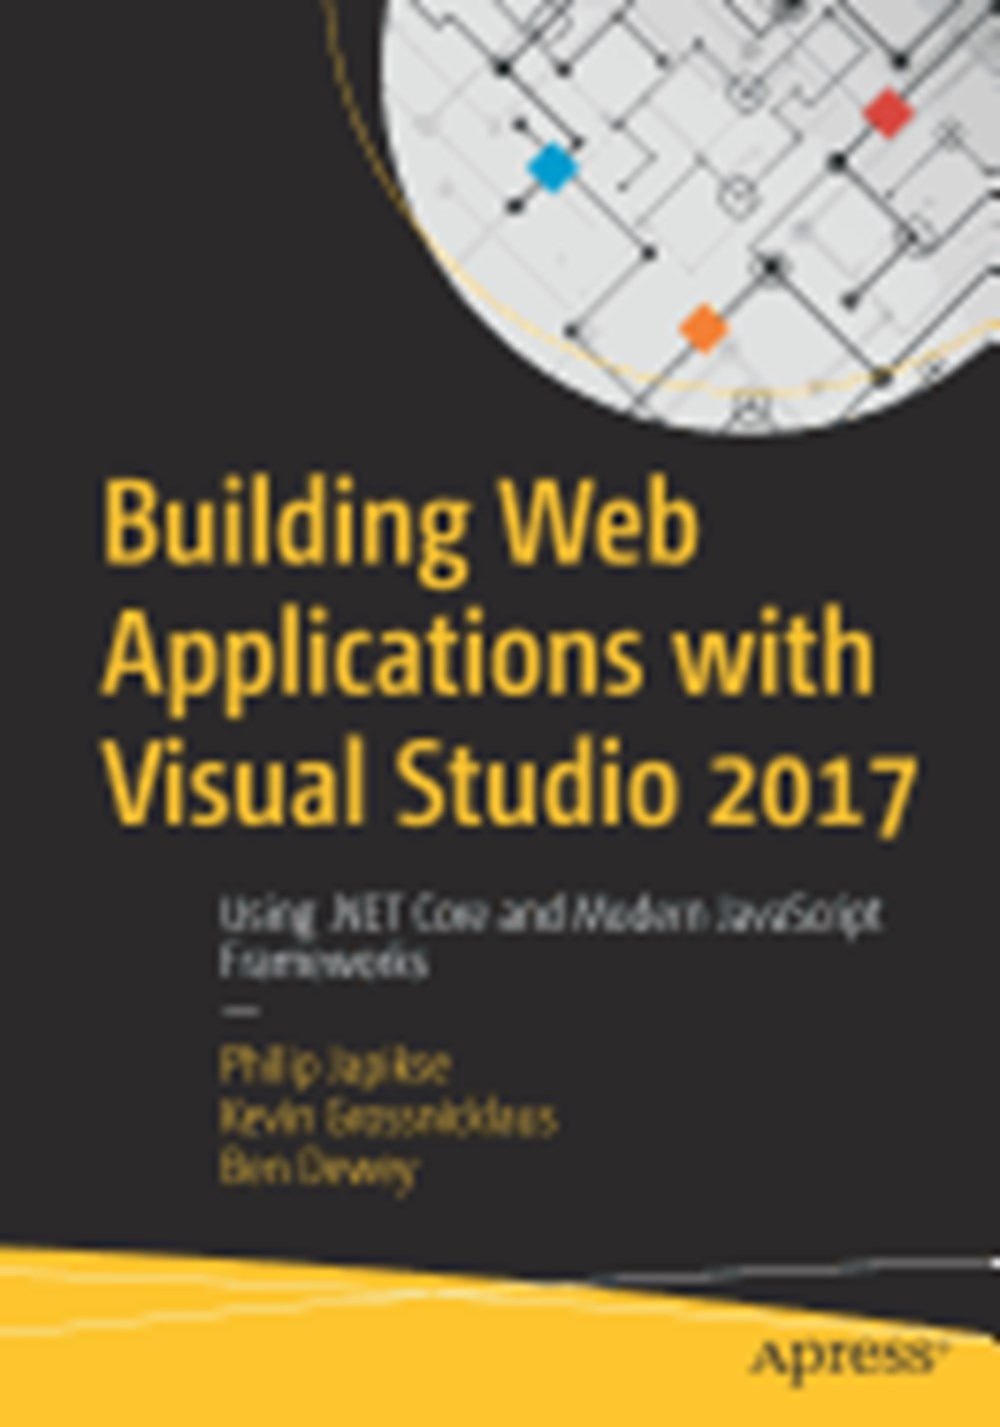 Building Web Applications with Visual Studio 2017: Using .Net Core and Modern JavaScript Frameworks